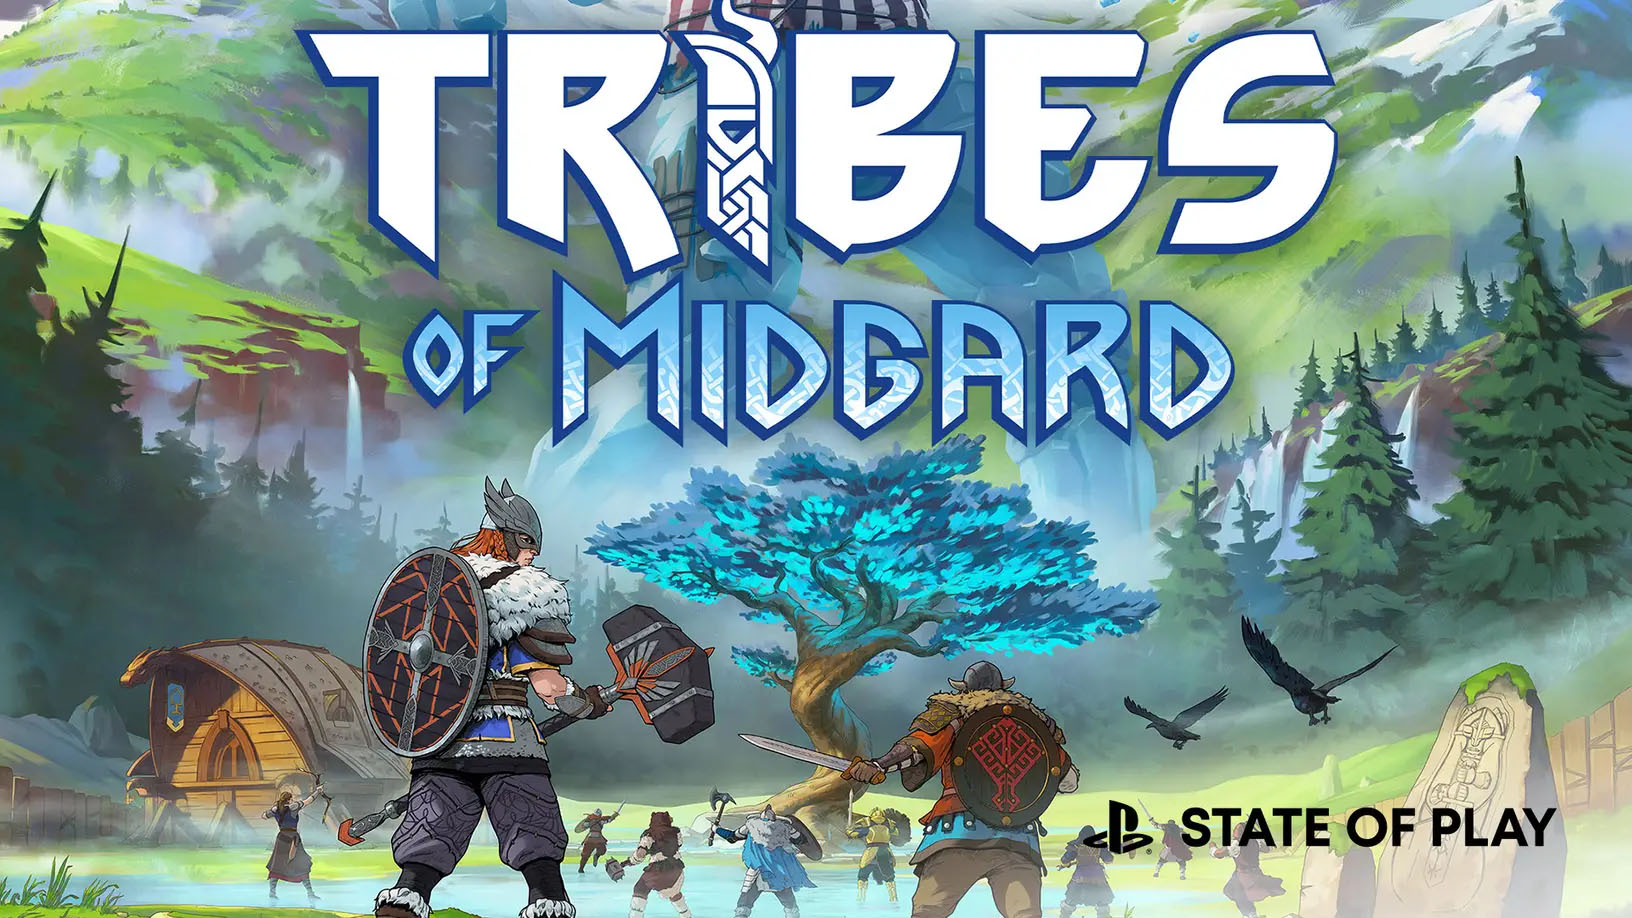 tribes of midgard trophy guide